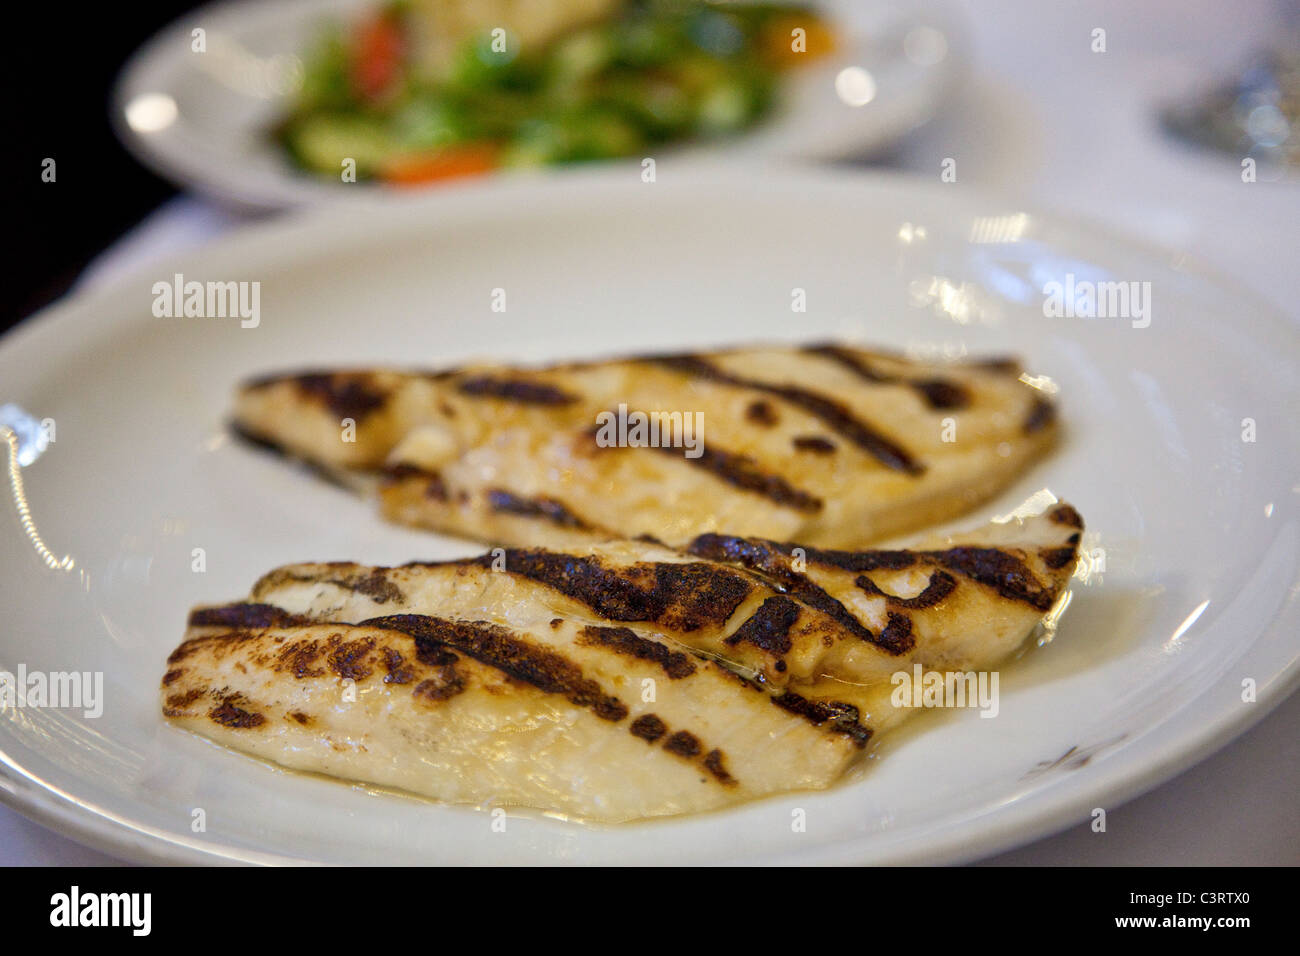 Grilled fish at Cipriani Dolci, inside Grand Central Station, New York City Stock Photo